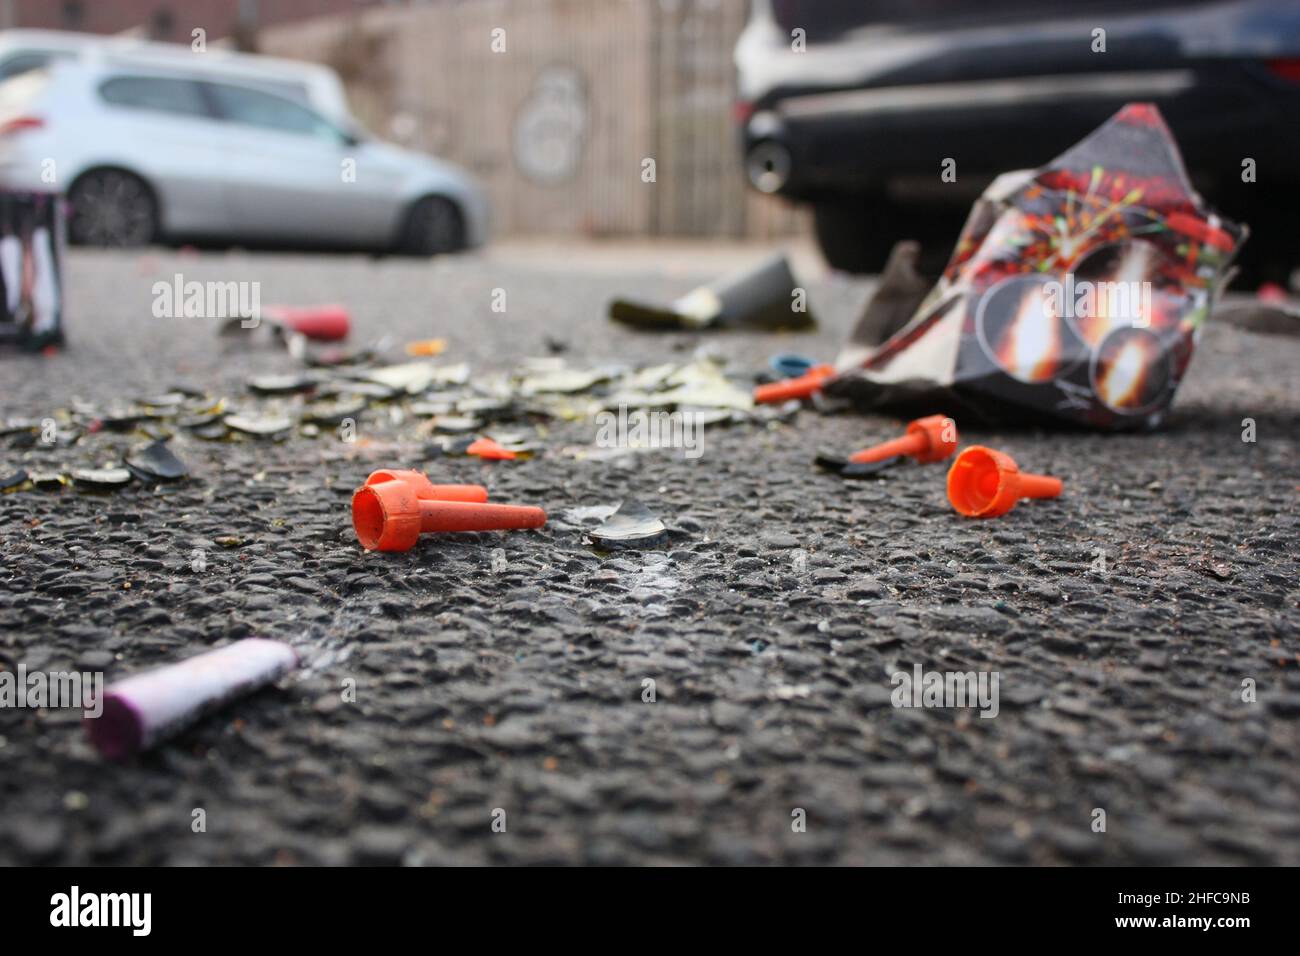 plastic trash and broken glass on the street after New Year celebrations in Germany Stock Photo